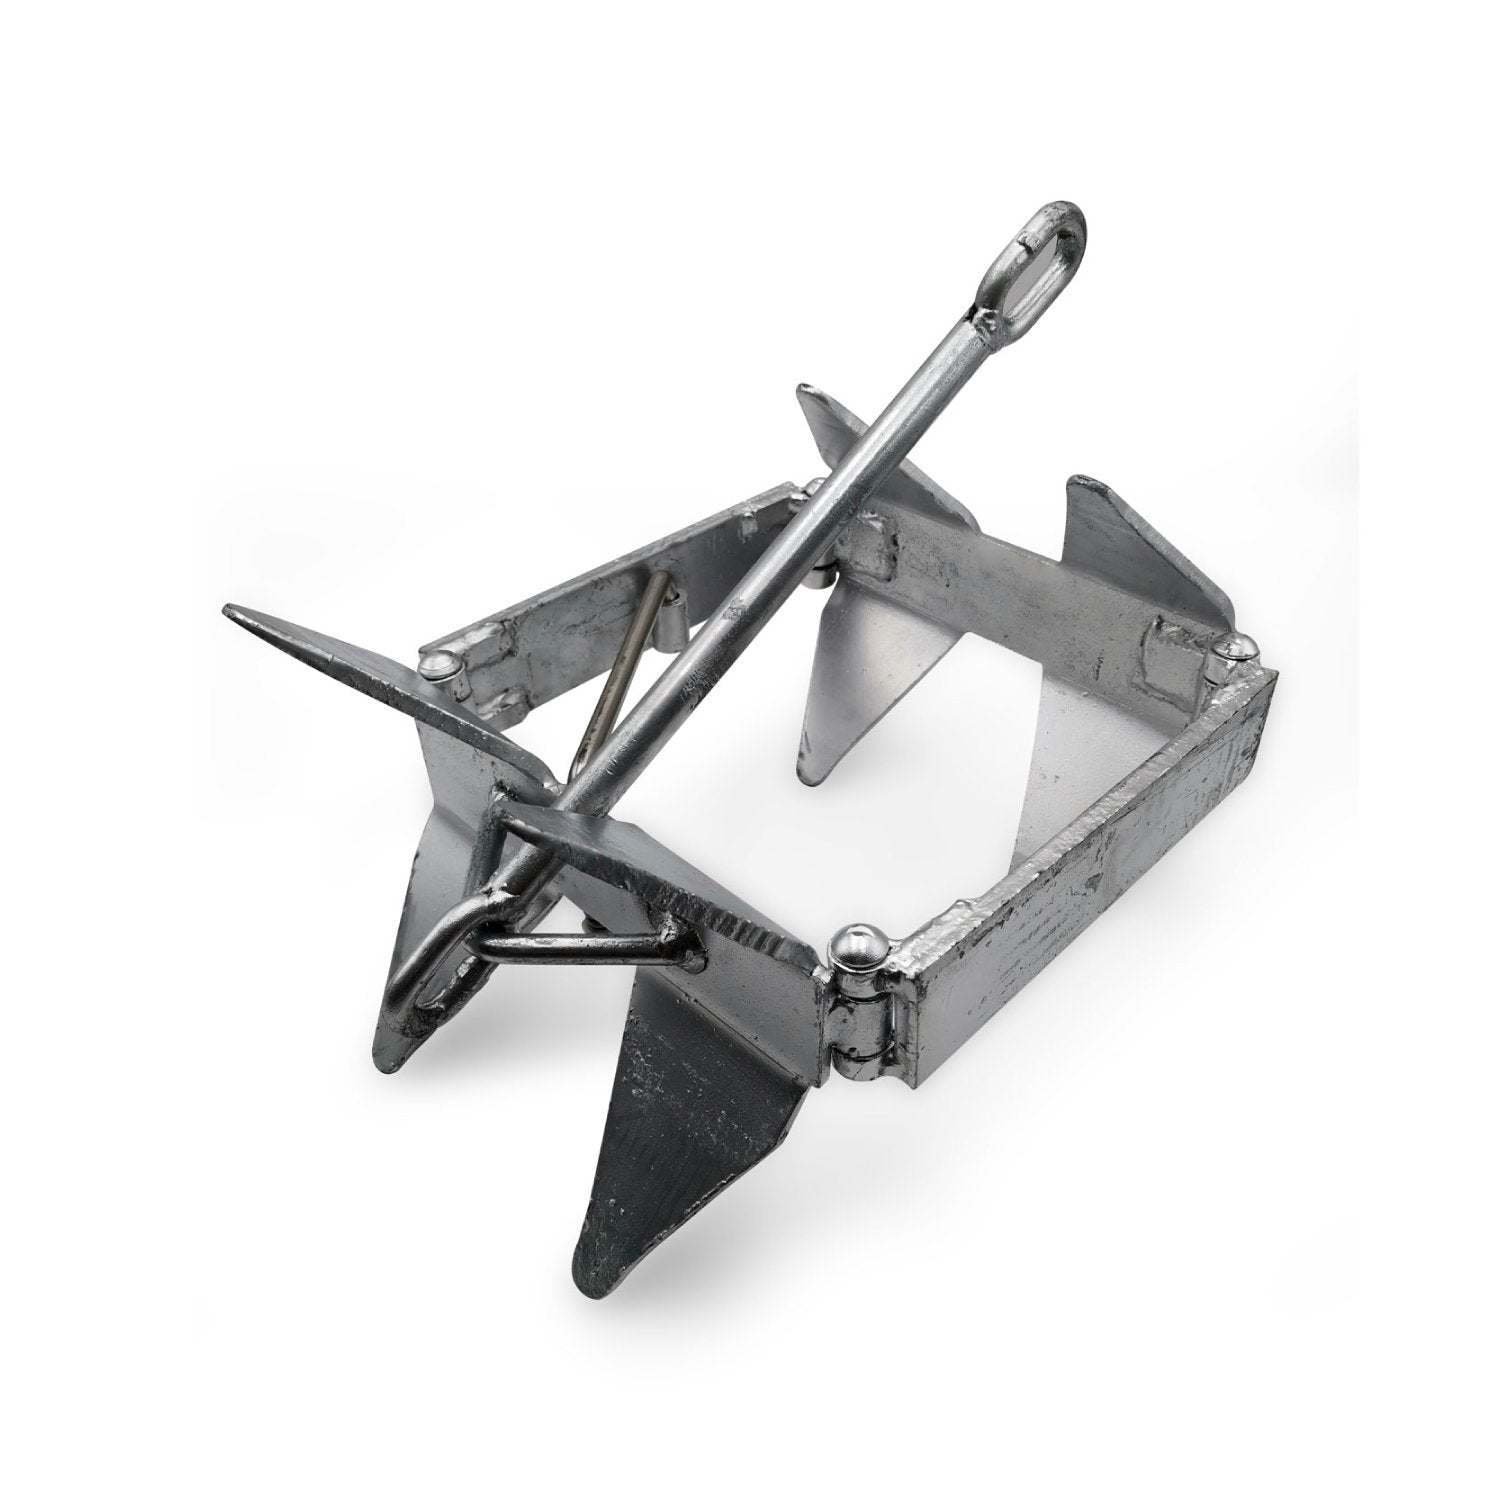 25 lbs Boat Anchor for Sale Online at Anchor-Man, Buy Now